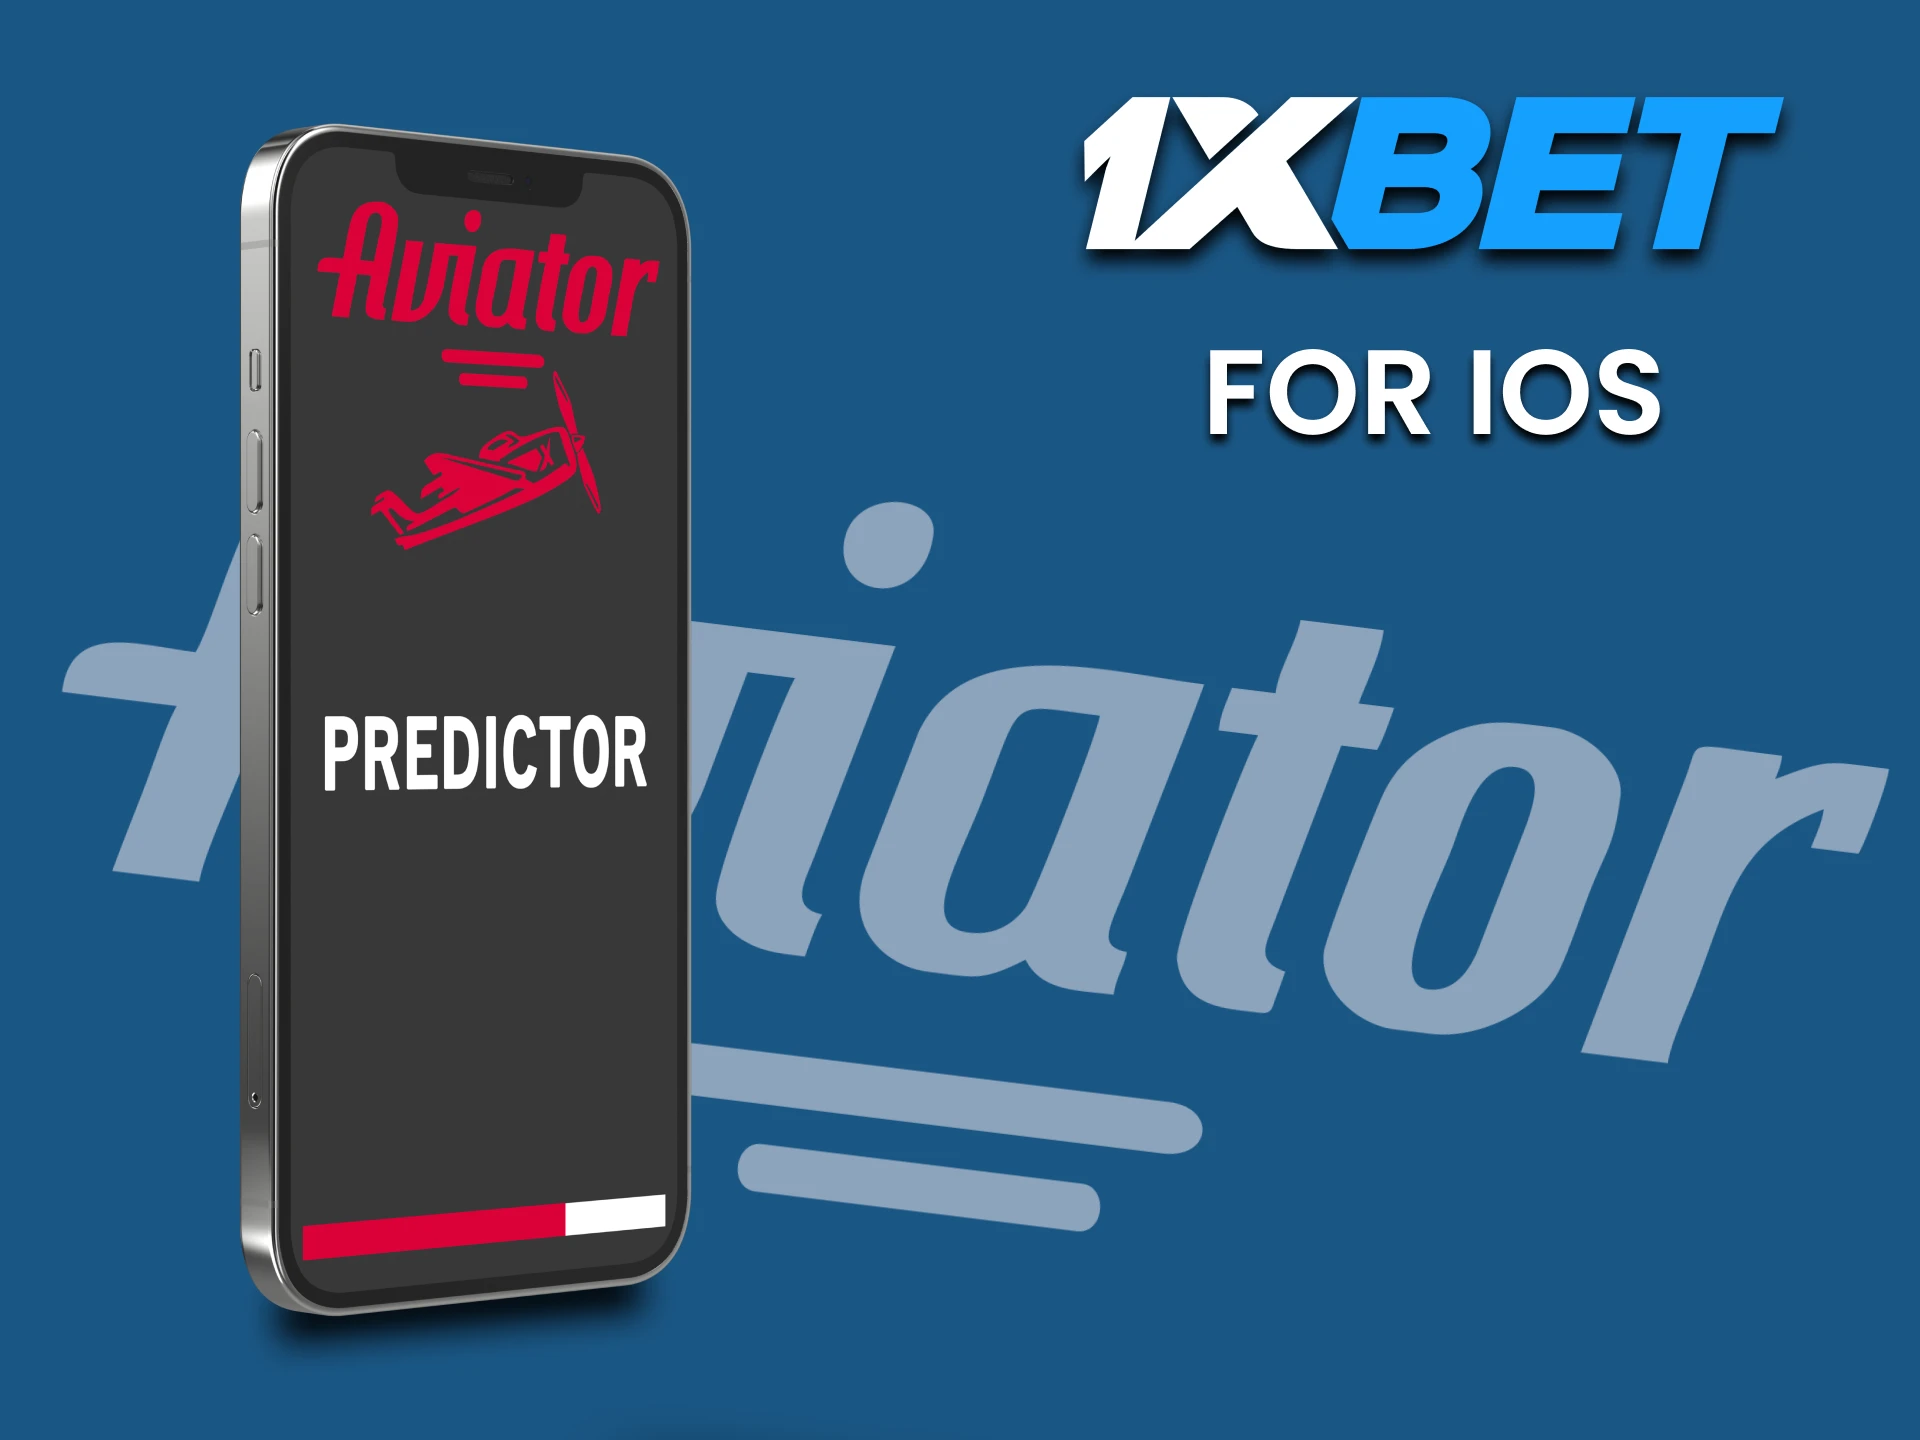 You can install Predictor for Aviator by downloading the application on your iOS device.